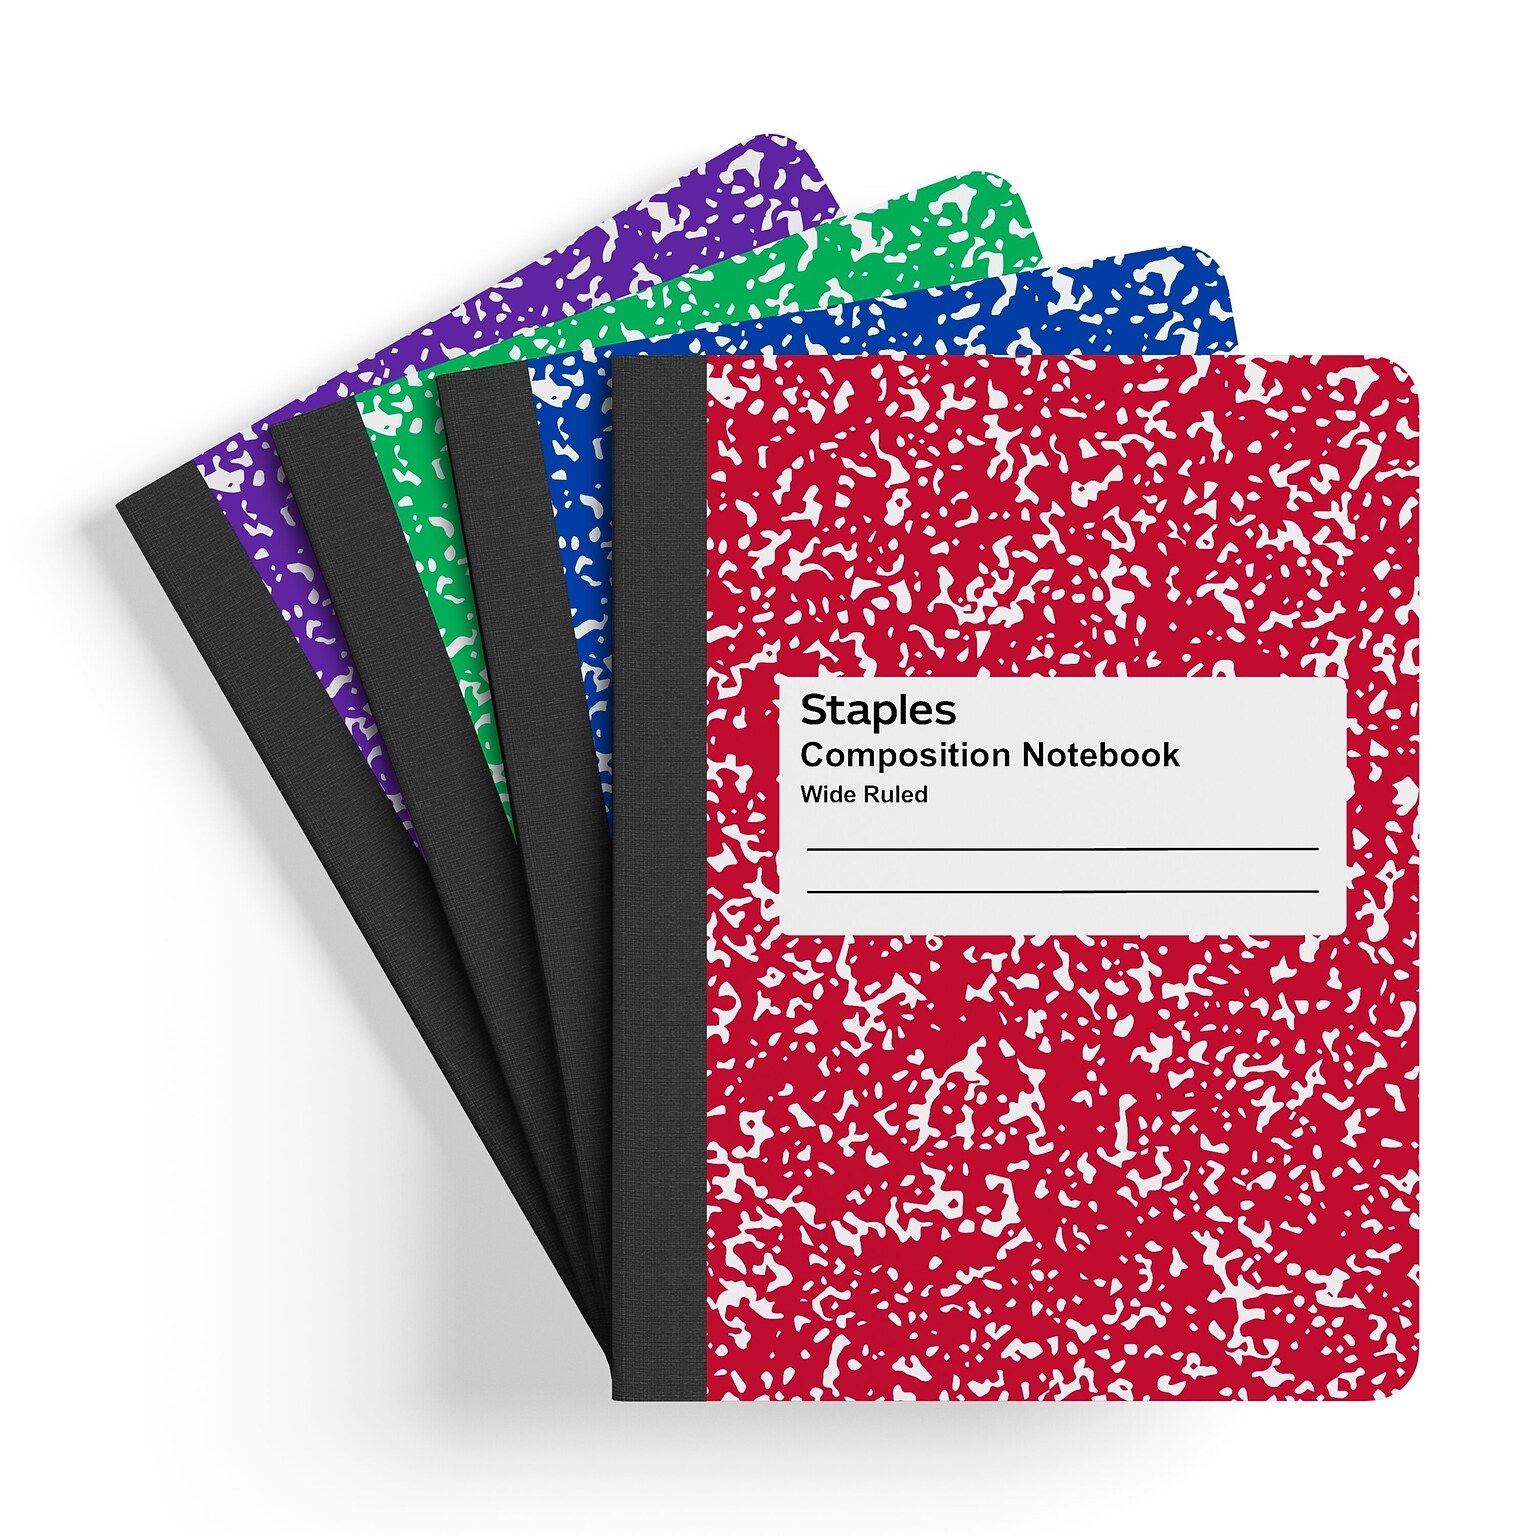 Staples® Composition Notebook, 7.5 x 9.75, Wide Ruled, 100 Sheets, Assorted Colors (ST55077)